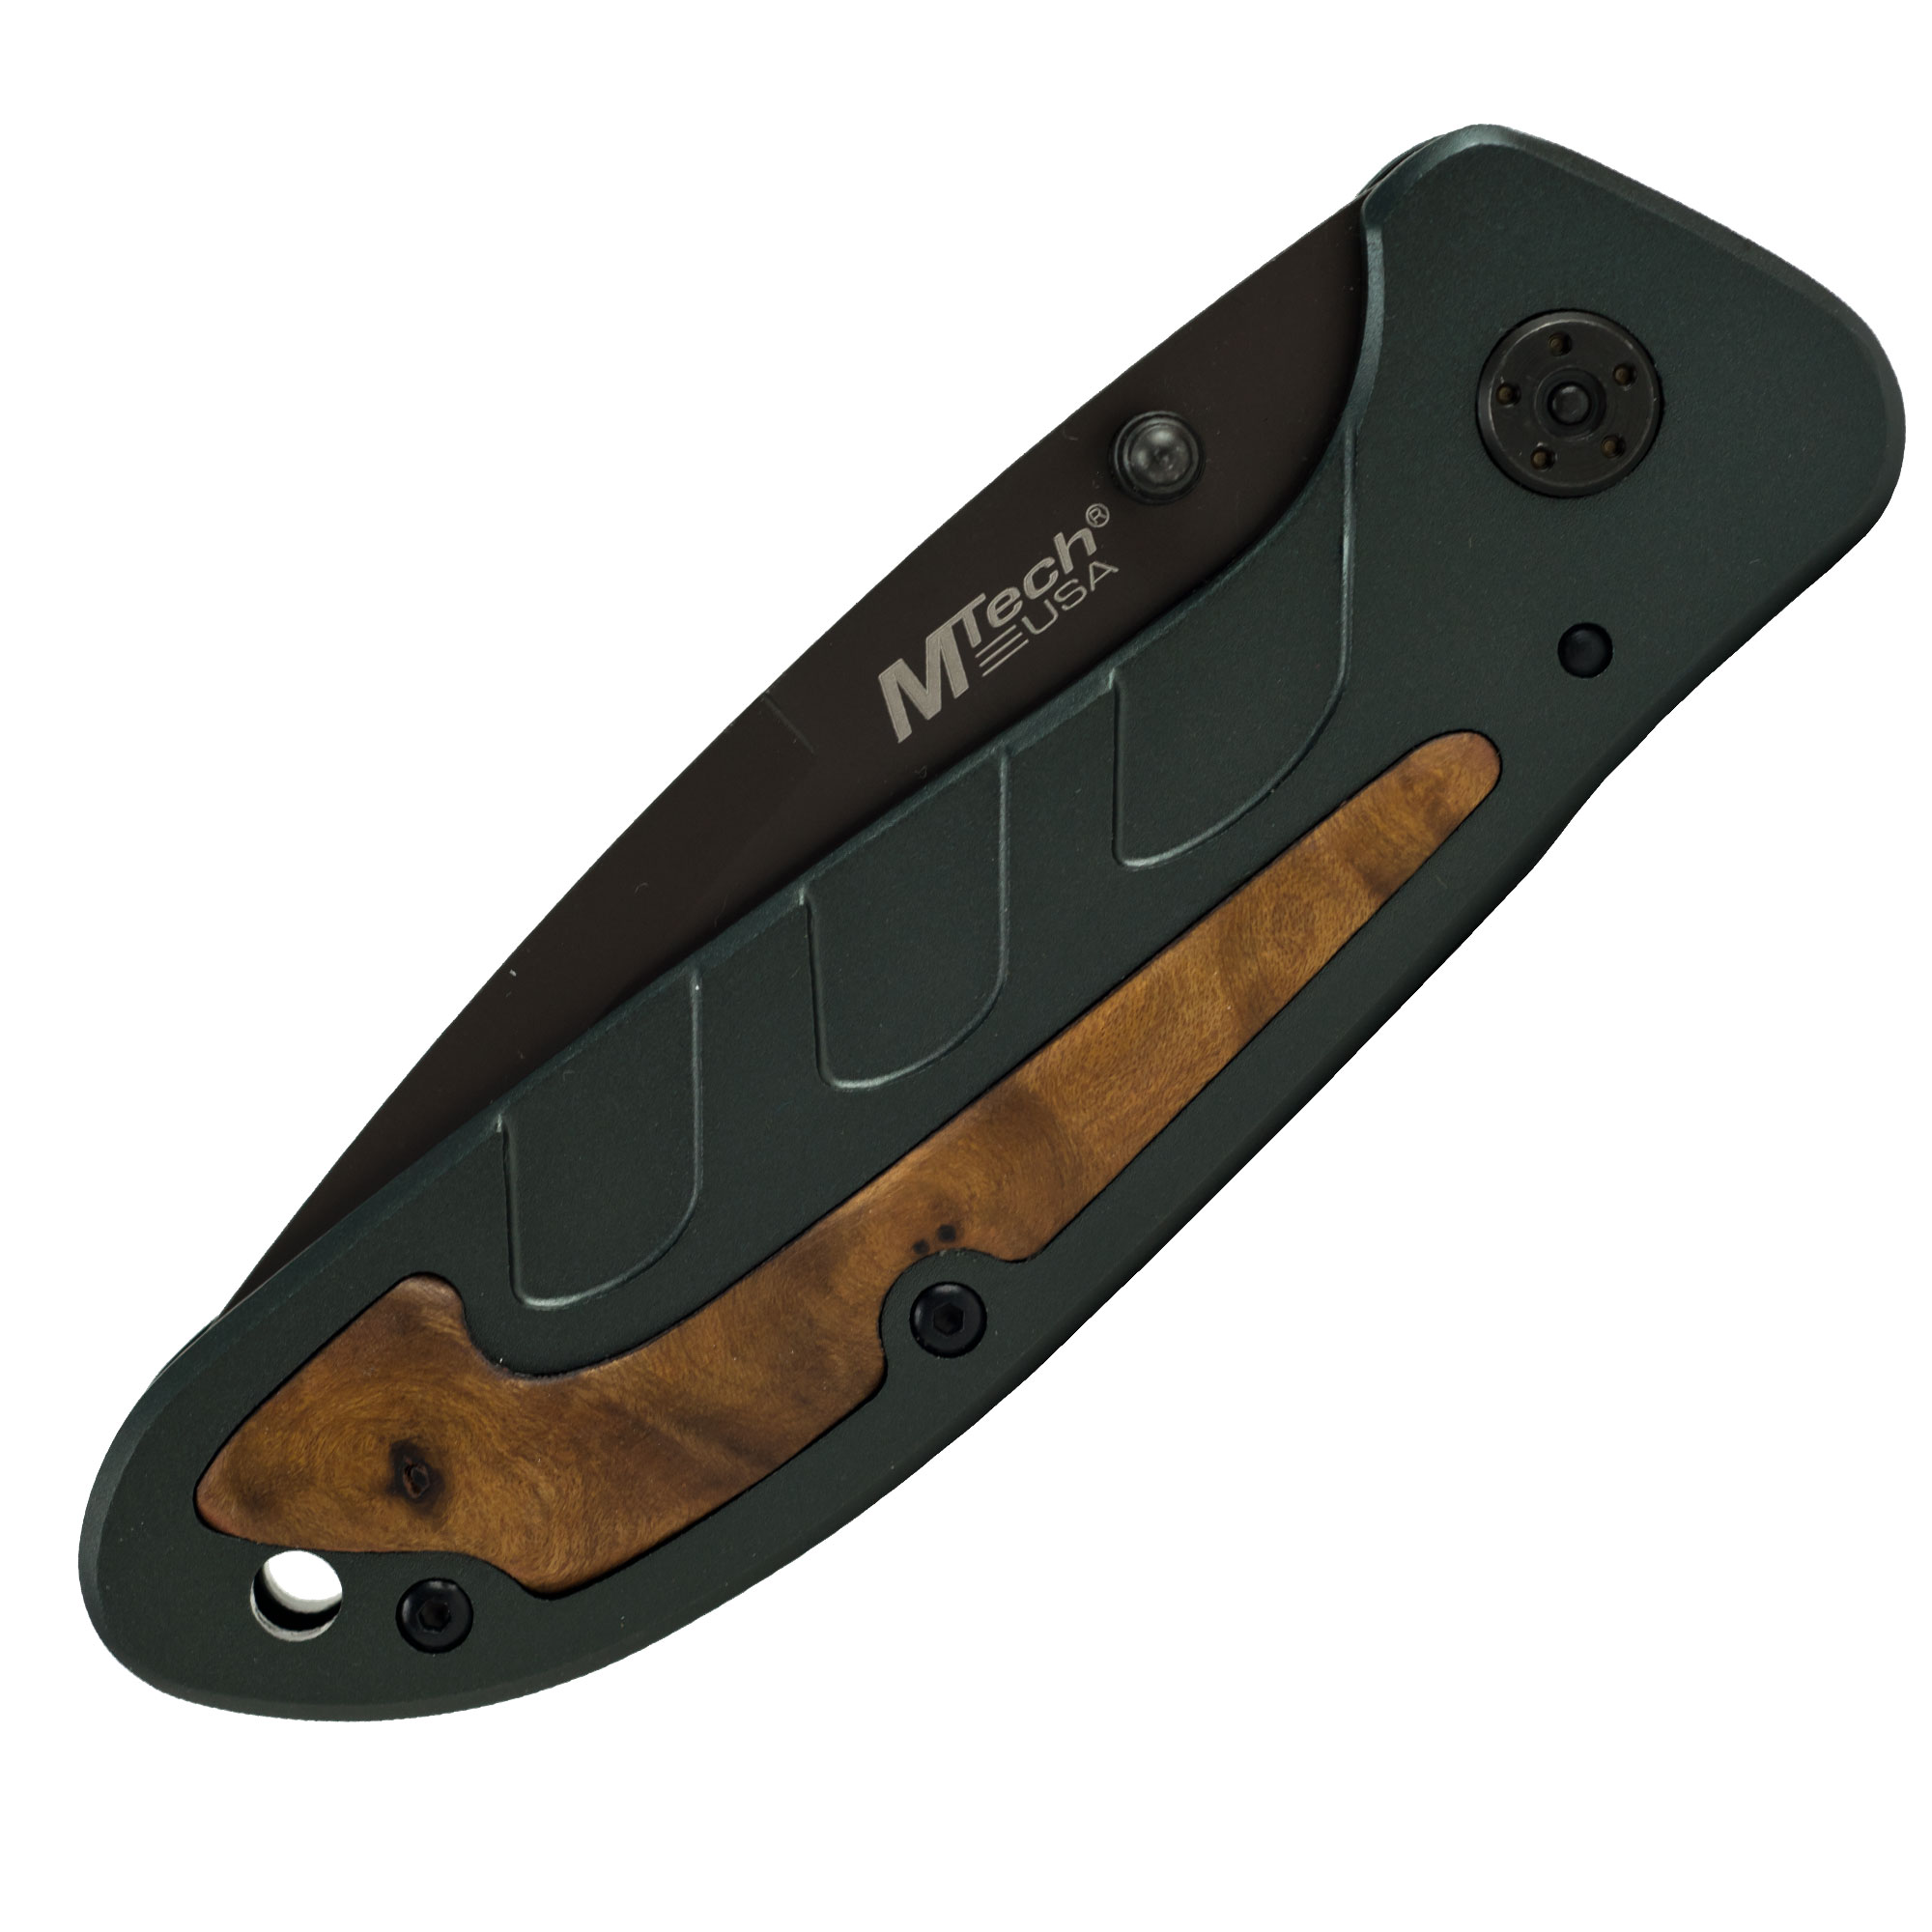 M-Tech Wood Inlaid Stainless Steel Utility Knife - 7.75 inches